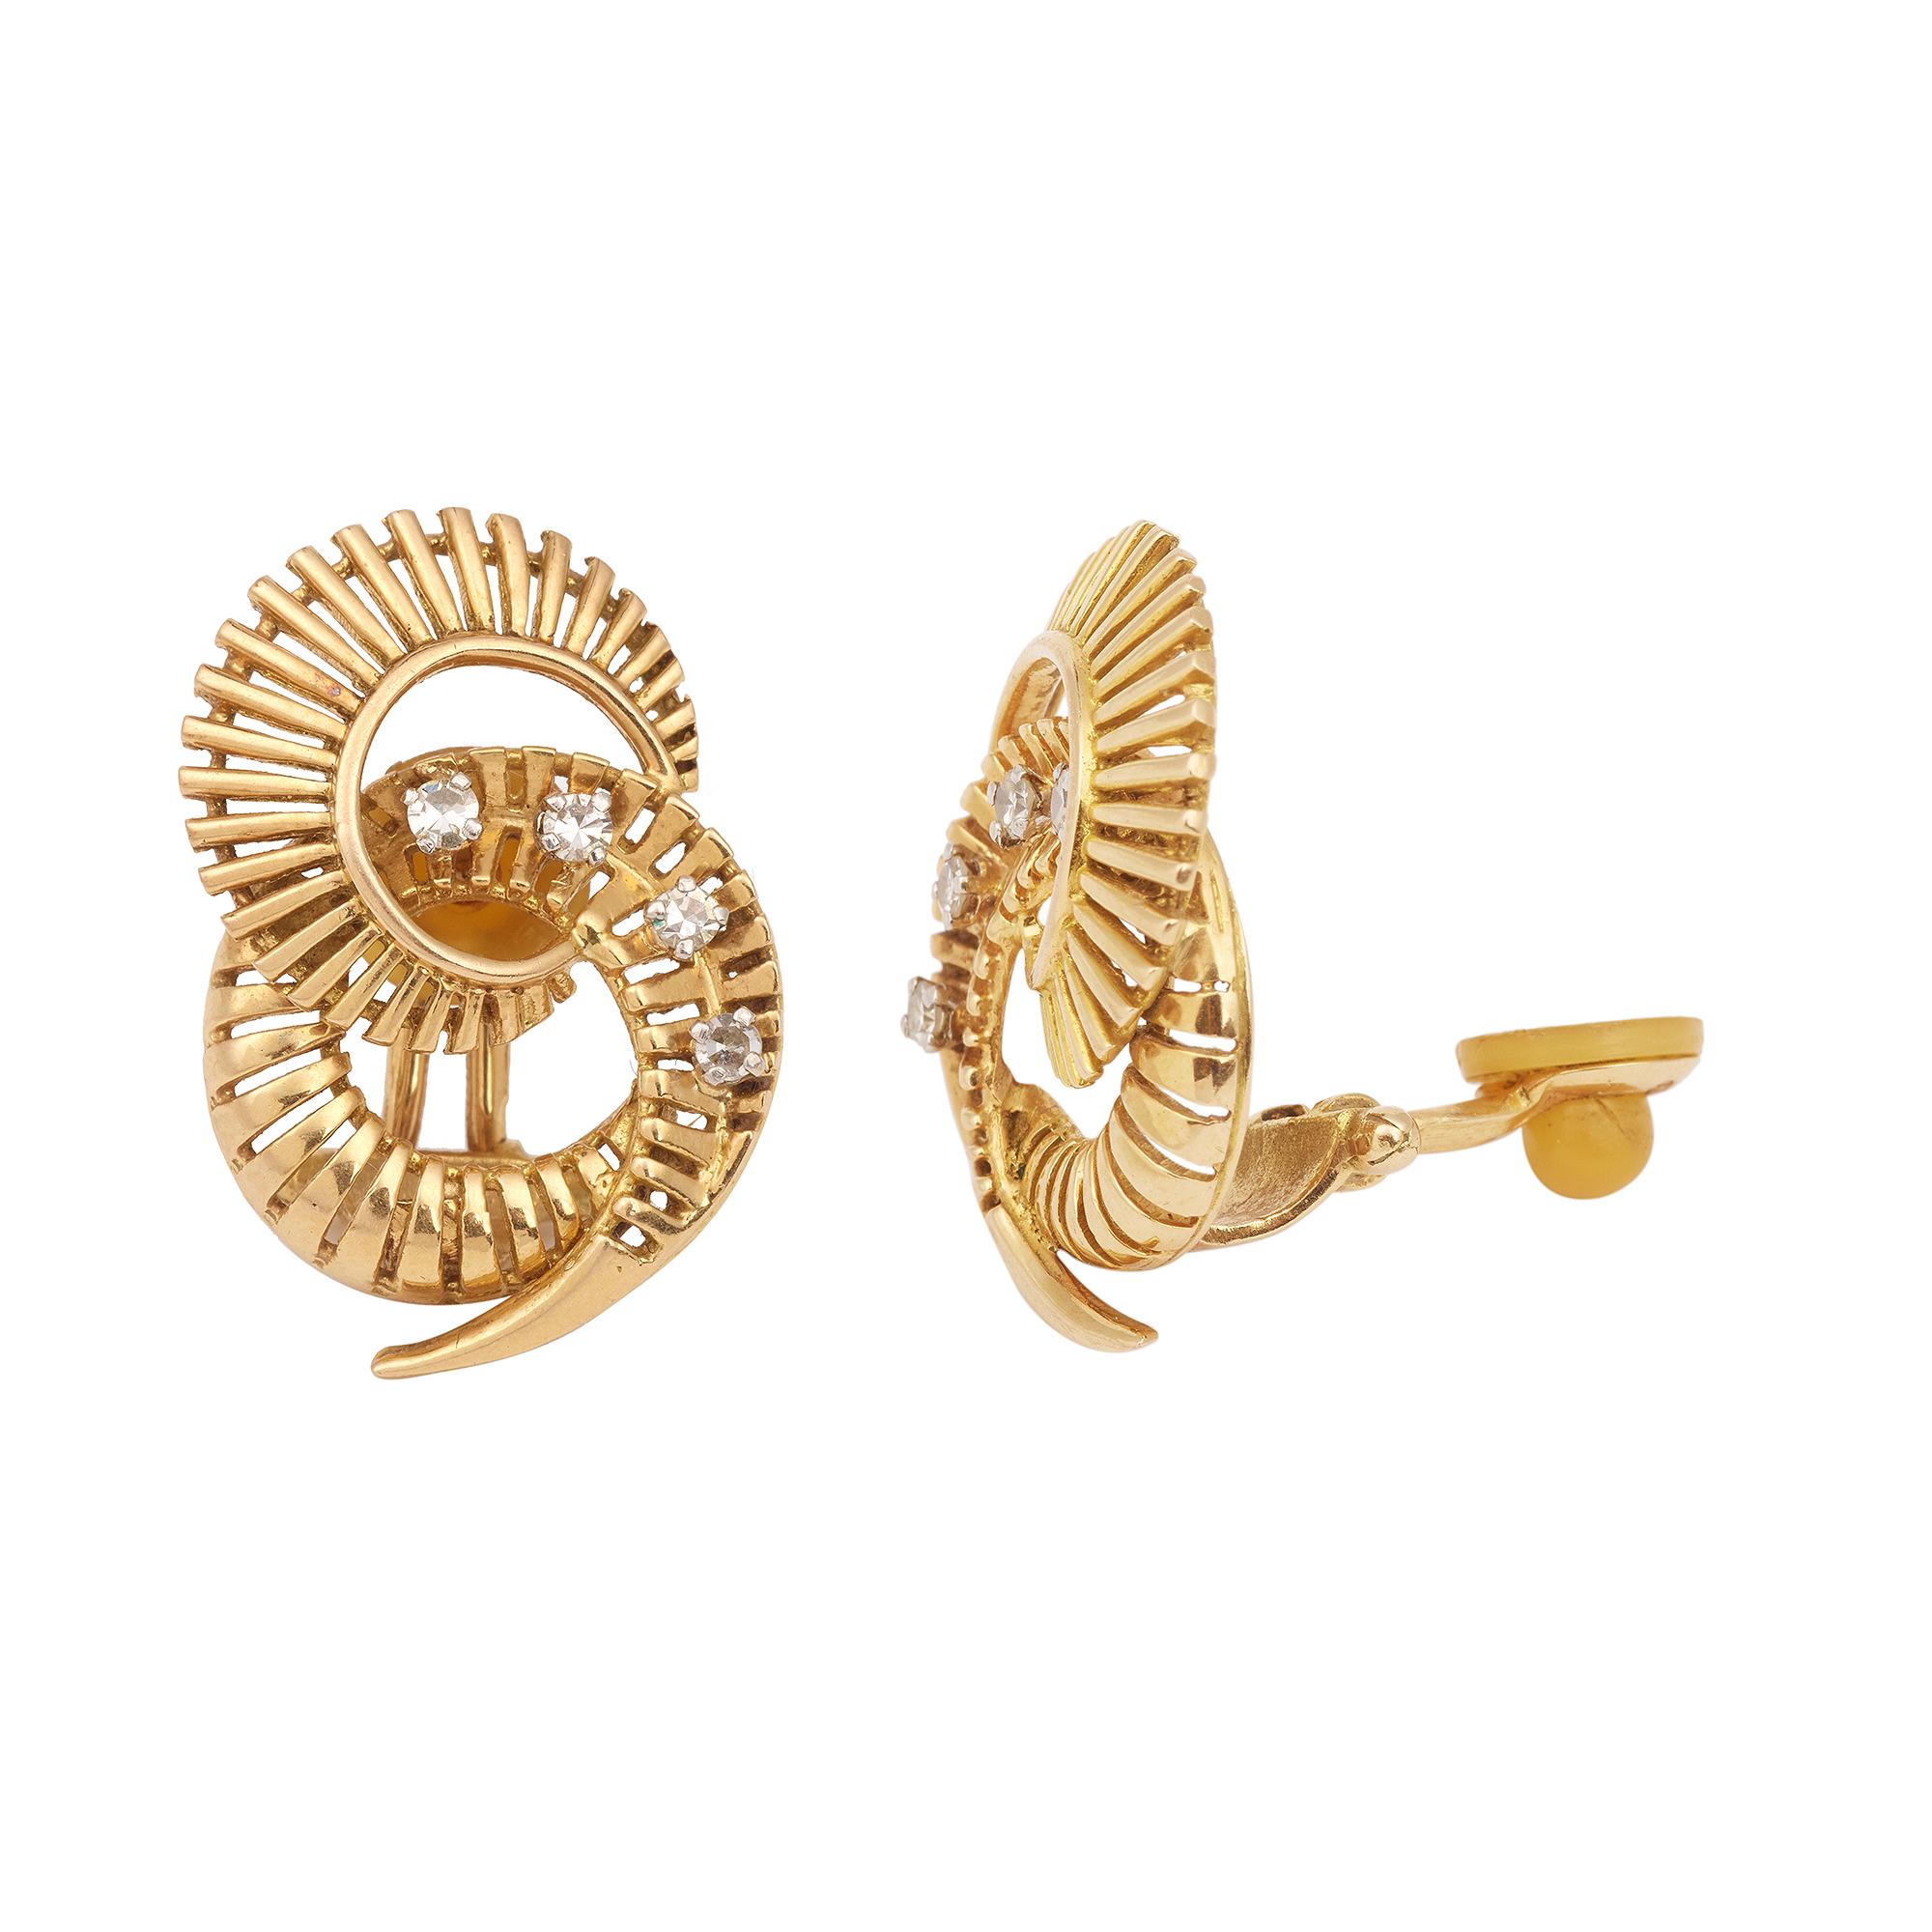 Amazing pair of Retro whirlwind earrings in yellow gold and set with brilliant-cut diamonds.
Clip on earrings.

Dimensions : 2.4 x 1.65 x 0.8 cm (0.94 x 0.63 x 0.31 inch)

Total weight of diamonds: approx 0.16 carats

18 karat yellow gold,